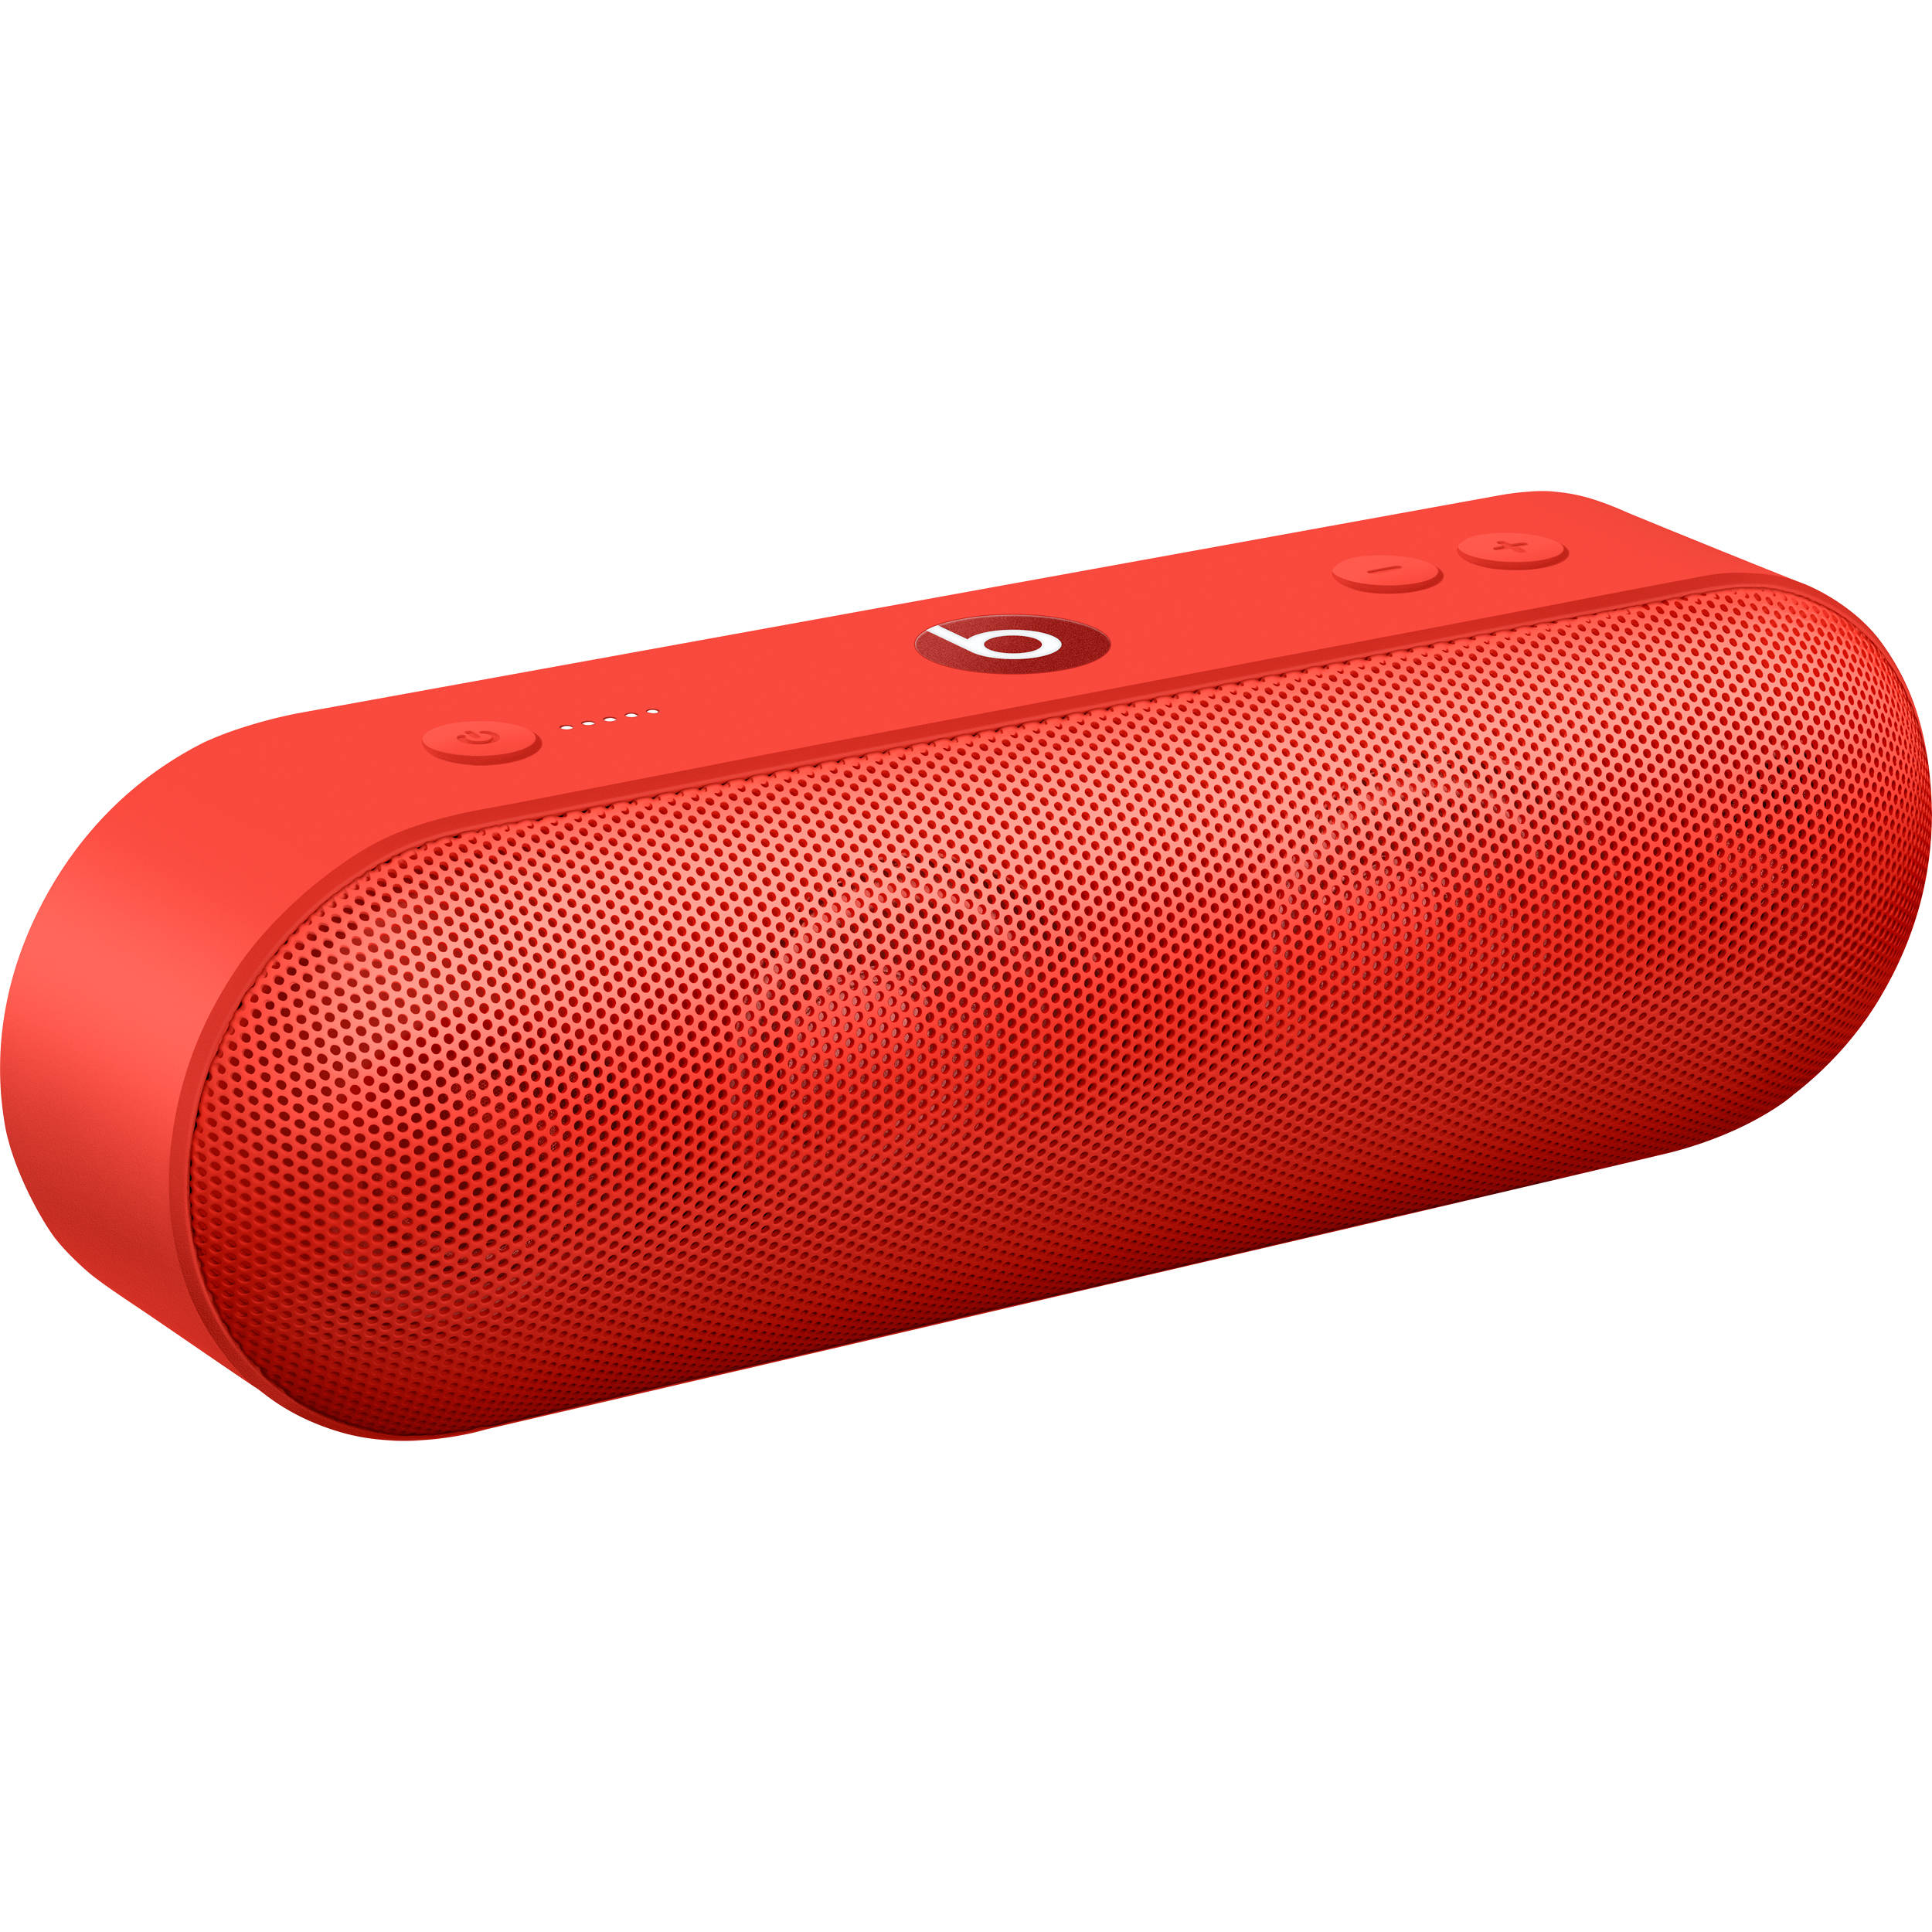 Beats Pill+ Portable Speaker, PRODUCT RED